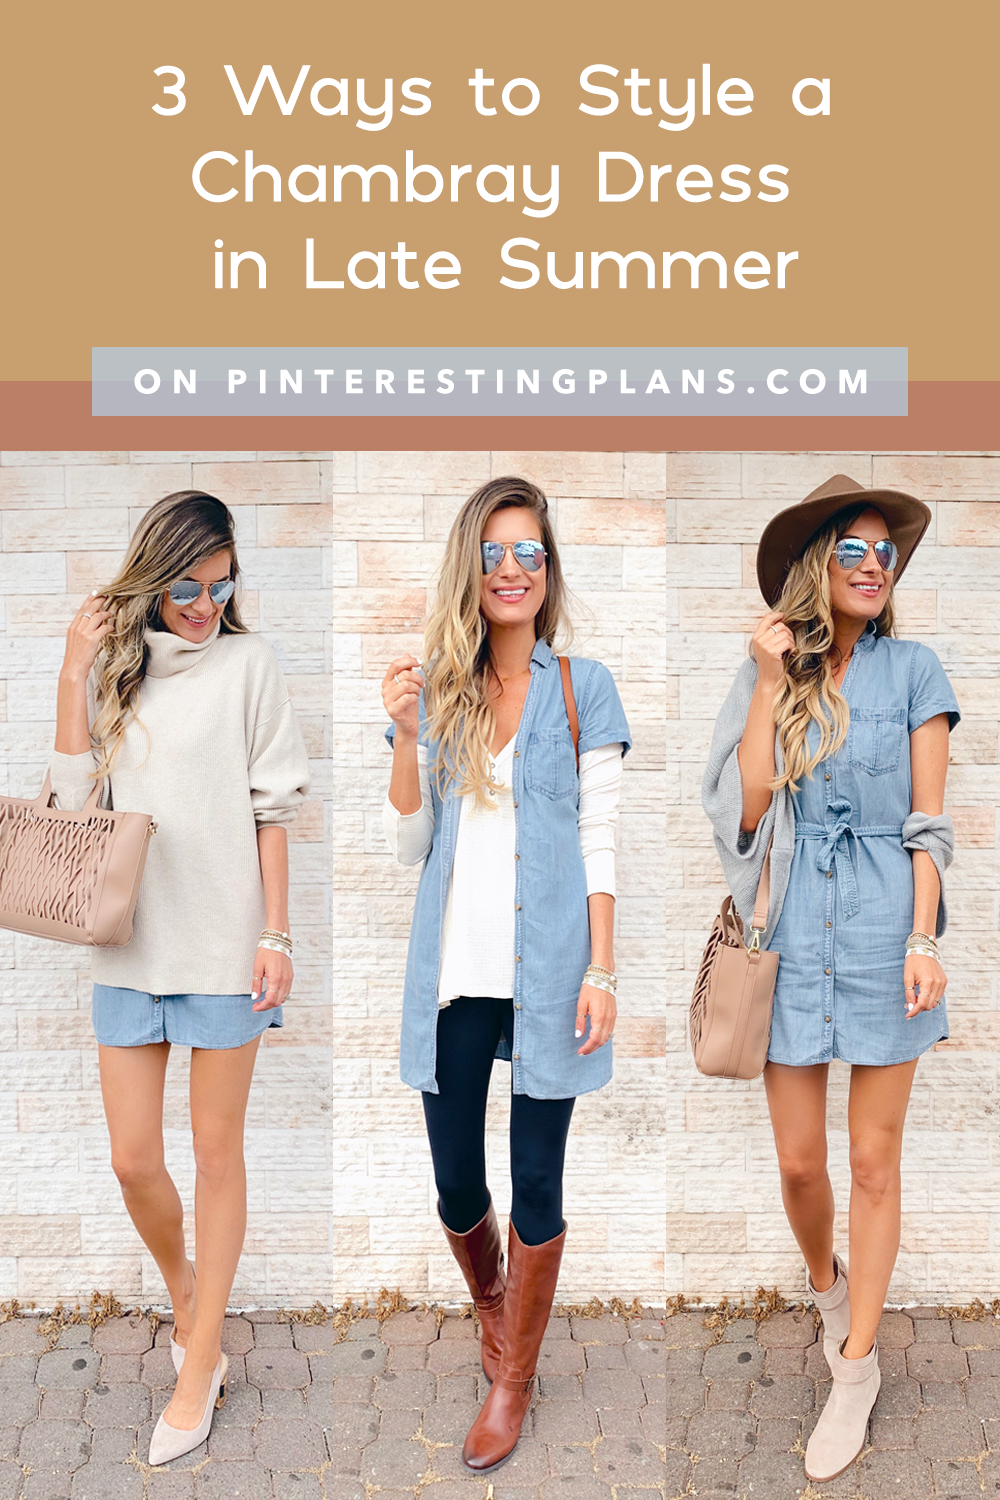 3 Ways to Style a Chambray Dress in Late Summer | Pinteresting Plans